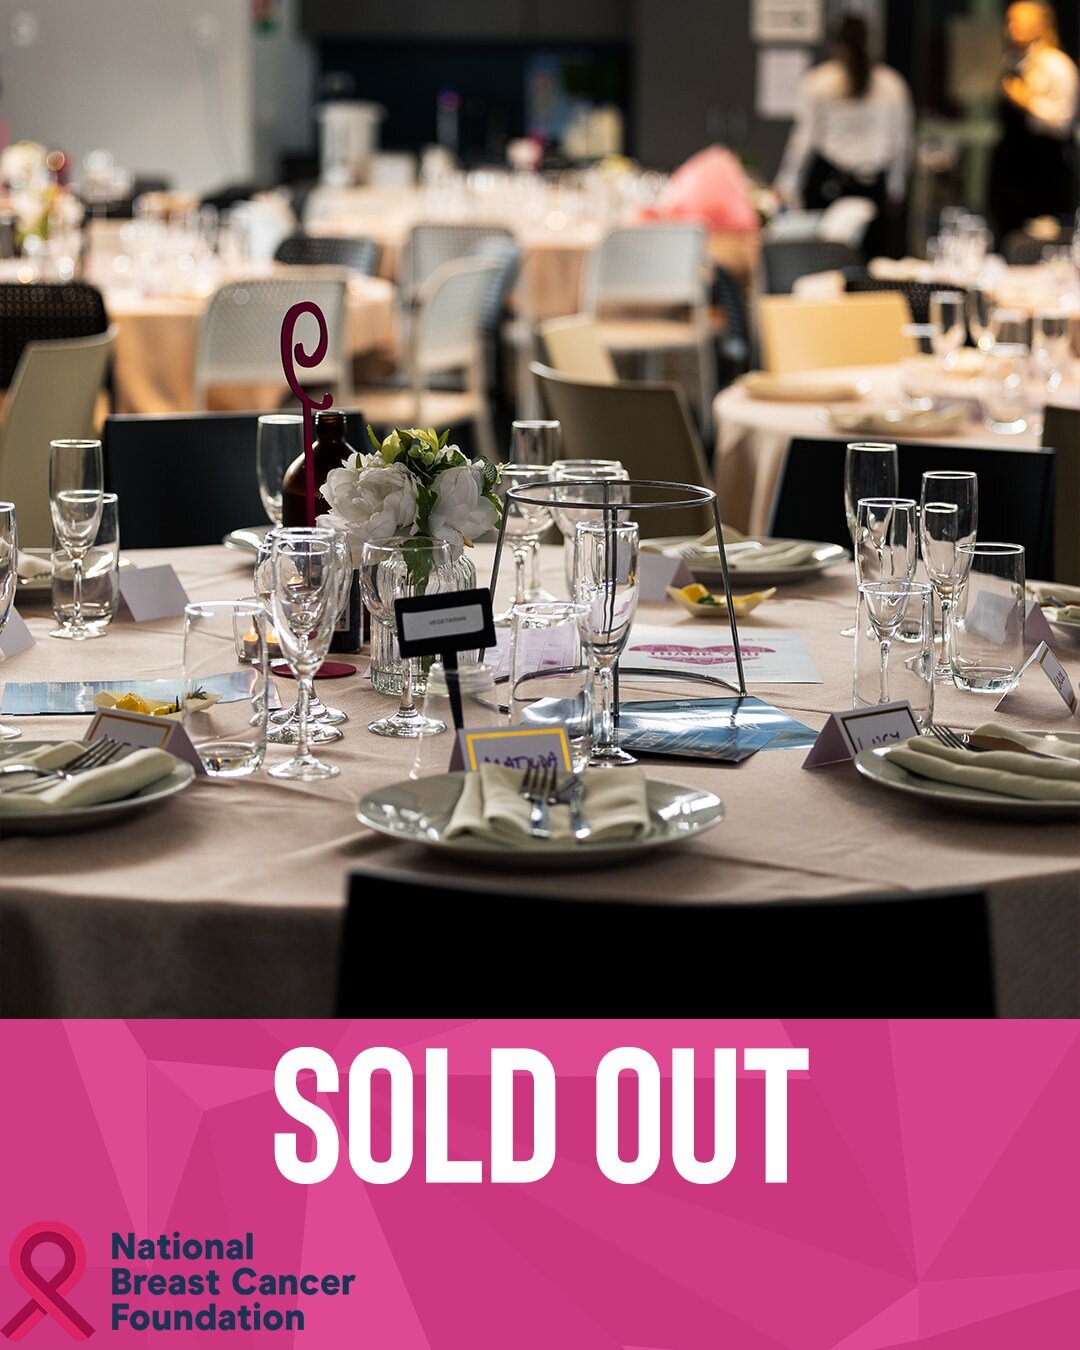 We have huge news to start the 2023 Ladies Luncheon week, and it's very exciting.

Every ticket that was available this Saturday, is gone! 

A big thank you to everyone who will be showing up to Bennettswood this weekend to support this amazing cause